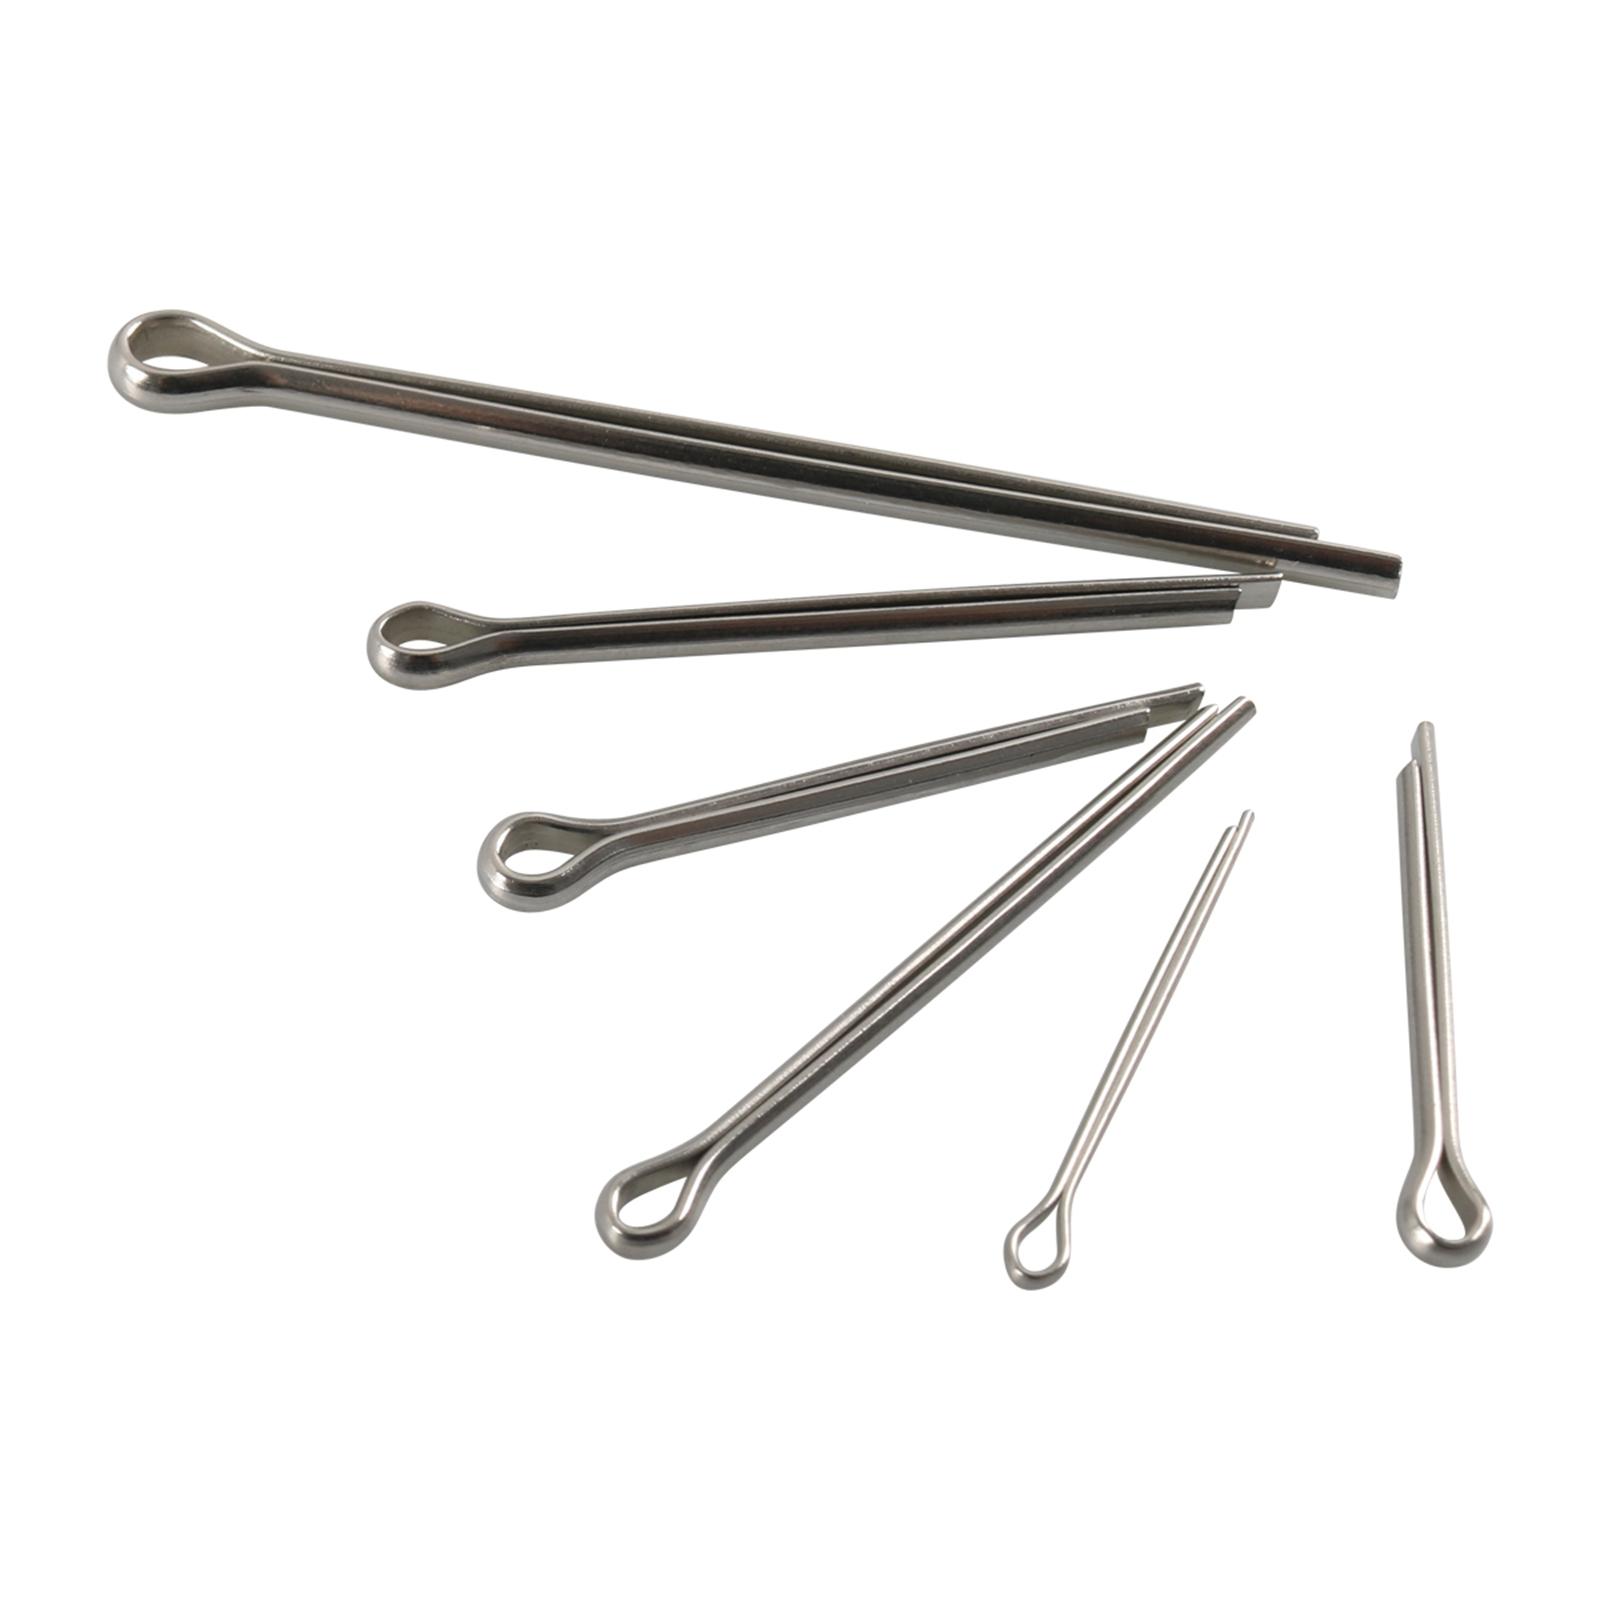 Cotter Pin Assortment Kit 6 Sizes Fit for Truck Automotive Power Equipment